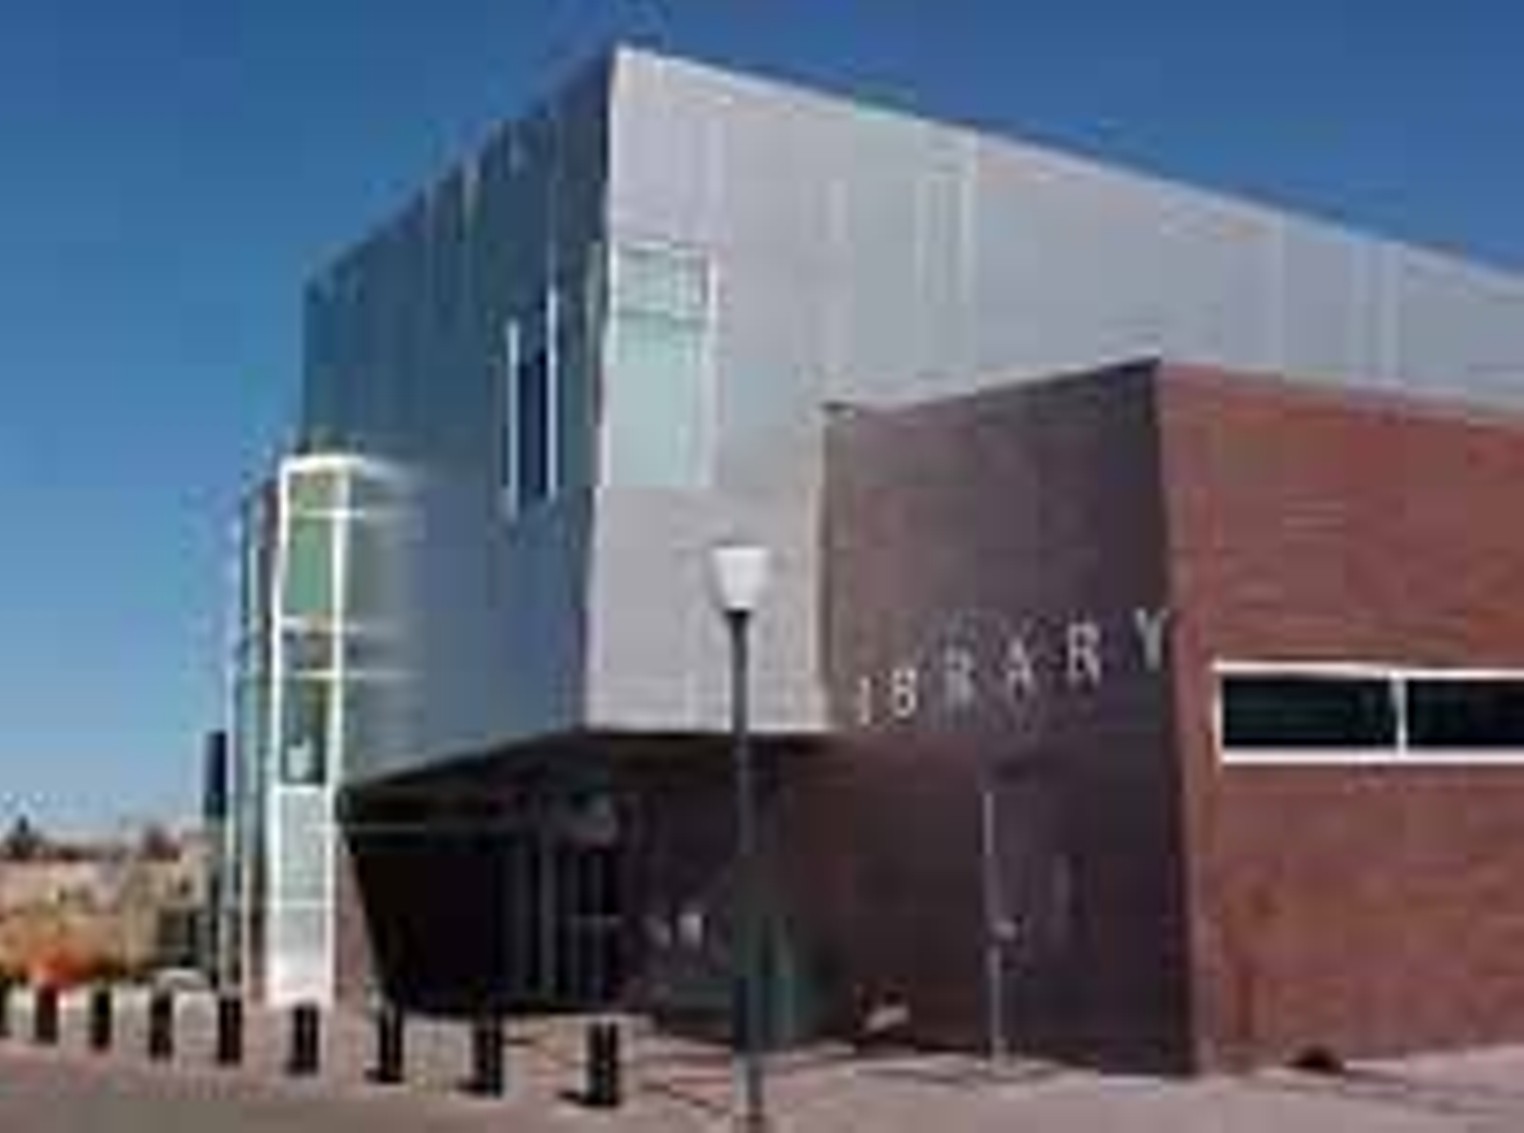 Best Public-Library Music Section 2003 Schlessman Family Branch Library Best of Denver® Best Restaurants, Bars, Clubs, Music and Stores in Denver Westword